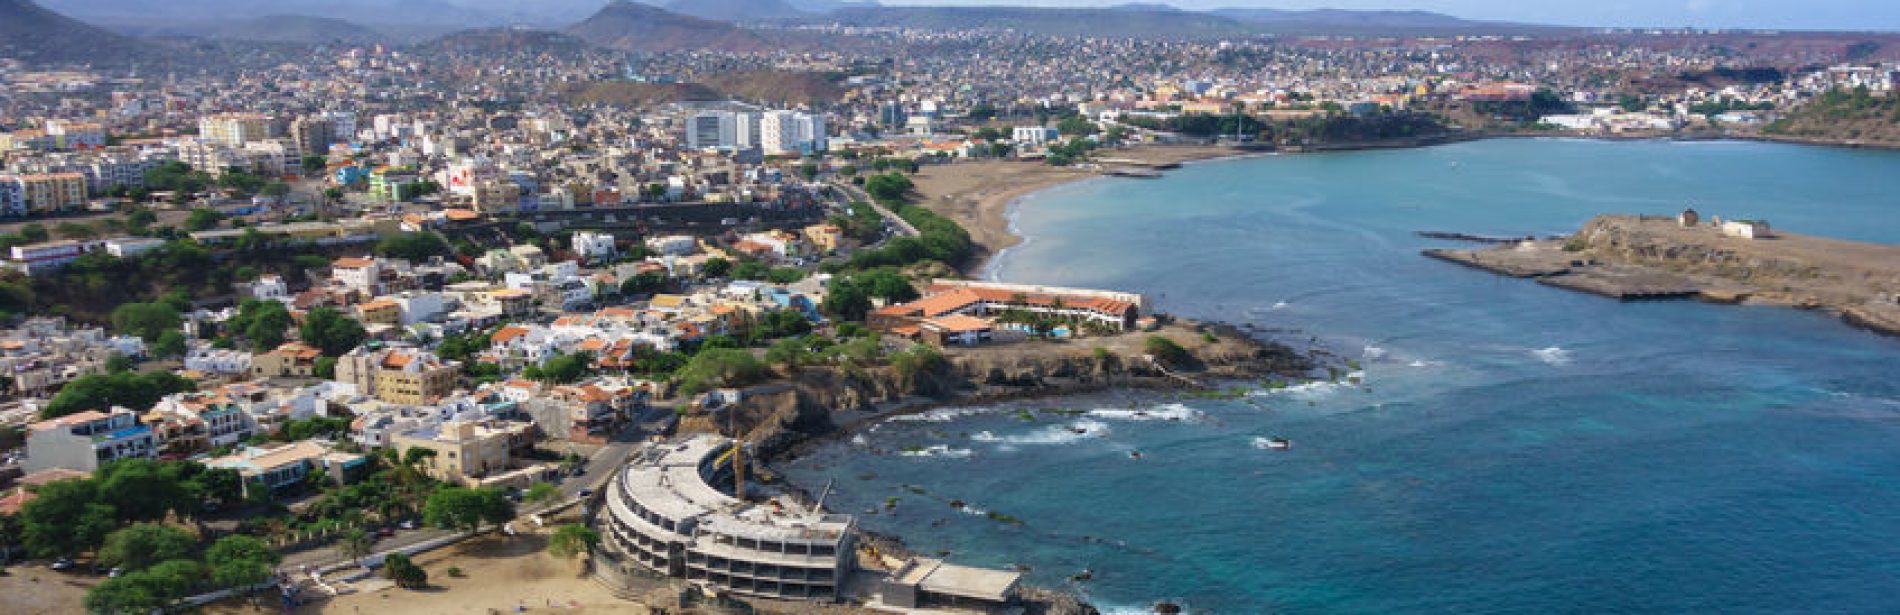 CLBrief: Aerial view of Praia